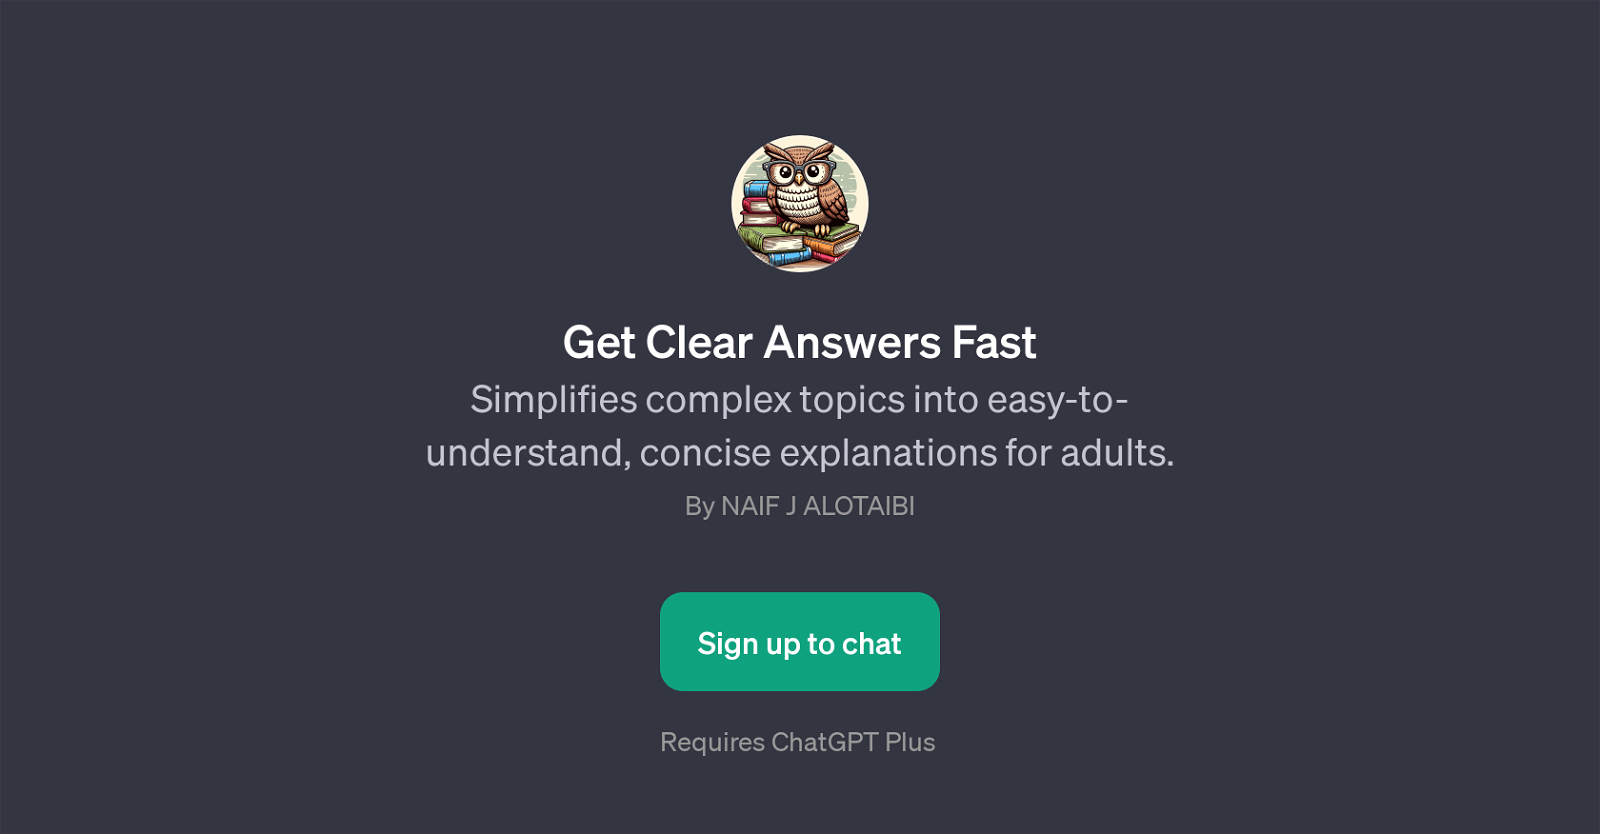 Get Clear Answers Fast website